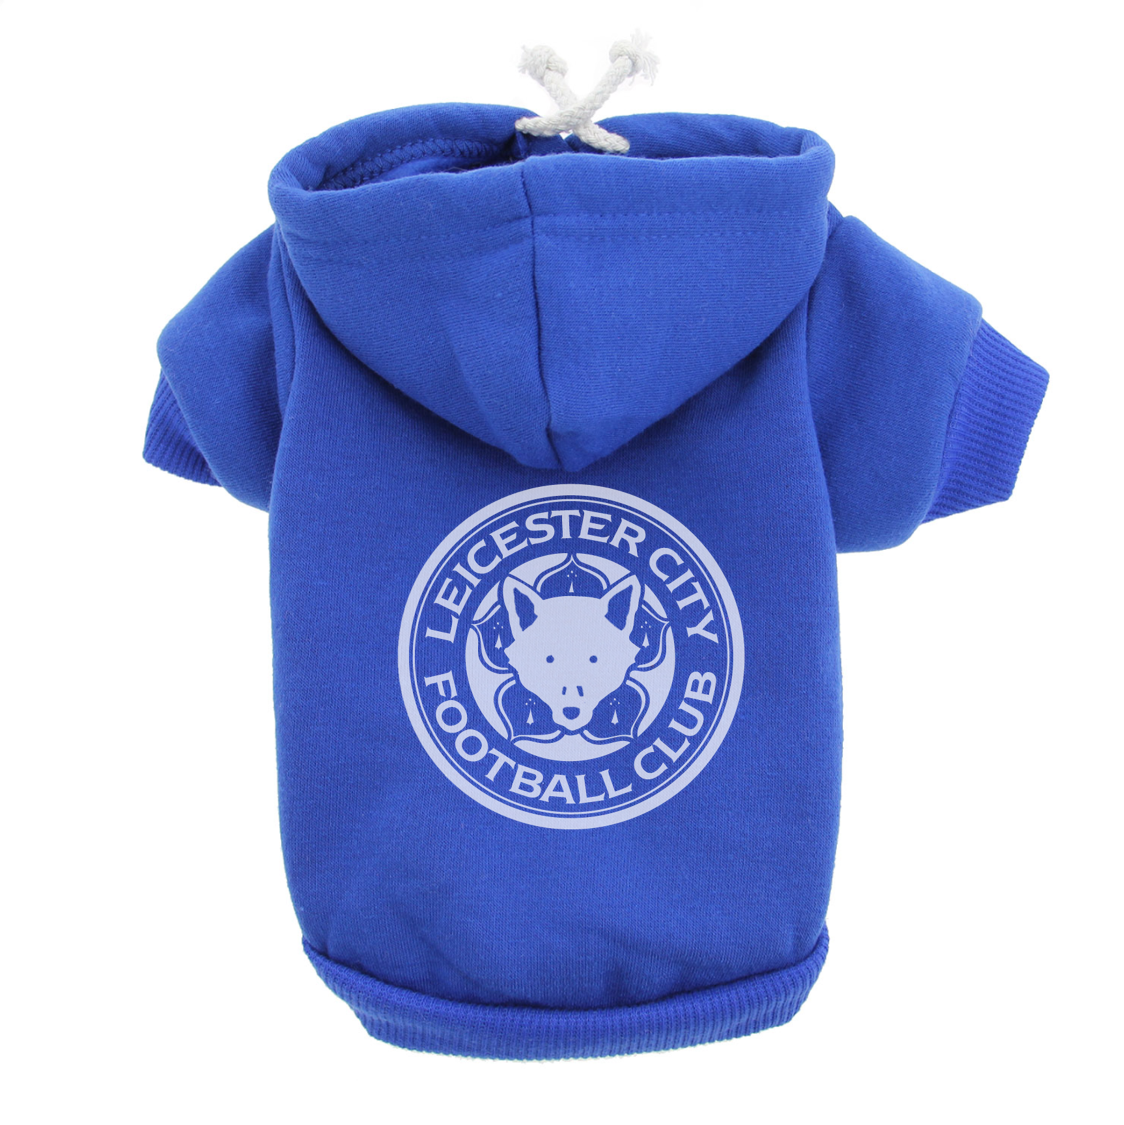 Leicester City FC Handmade Hoodies - 3 Red Rovers